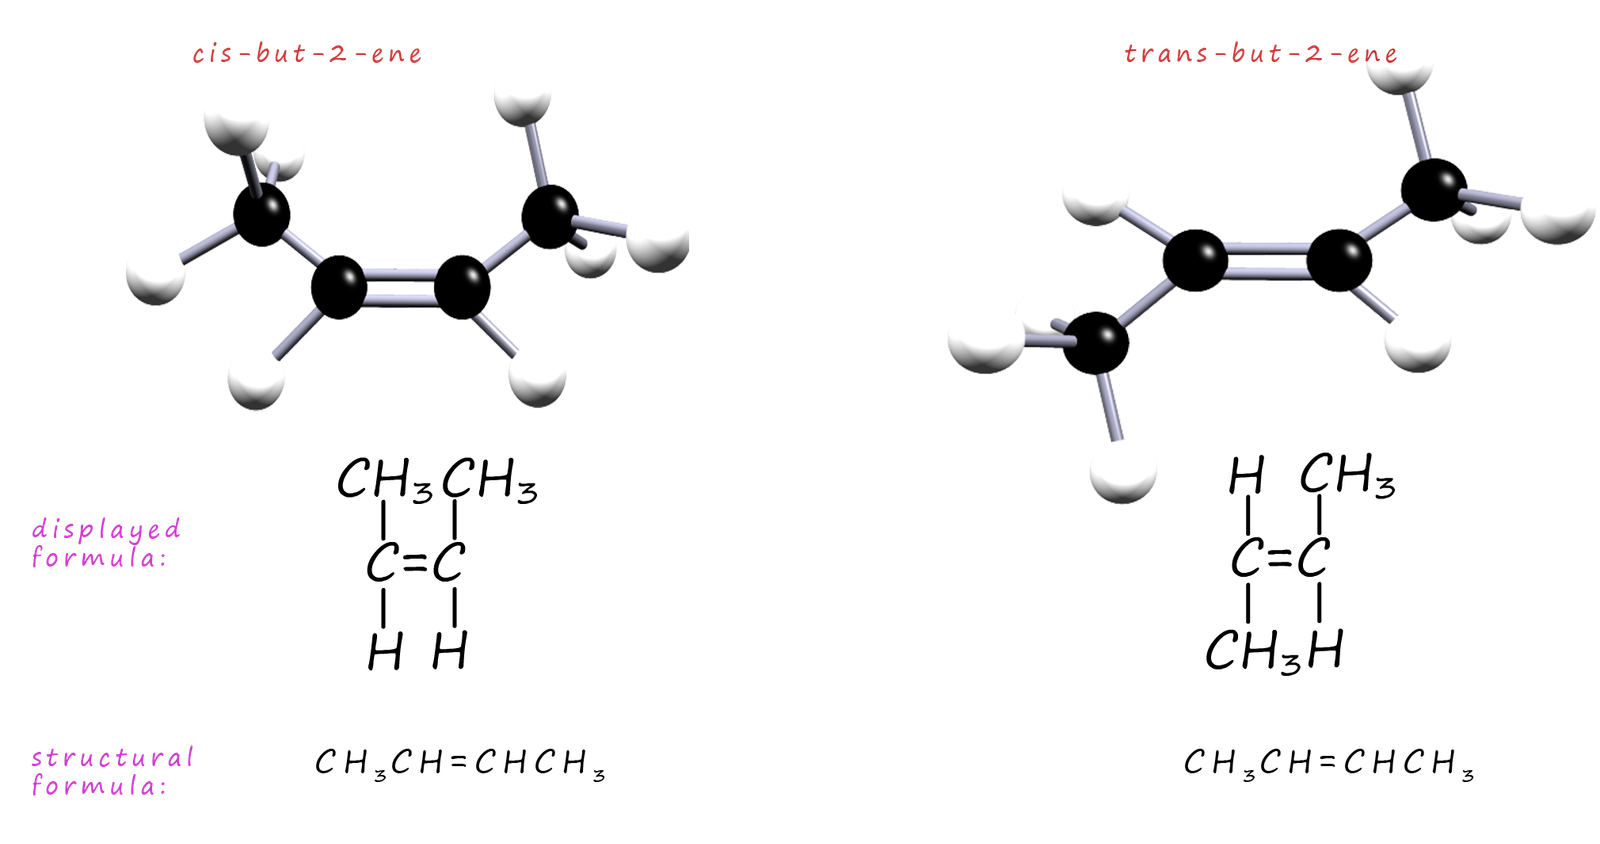 3d models to show the structure of the cis and trans isomers in but-2-ene.  Geometric isomers.